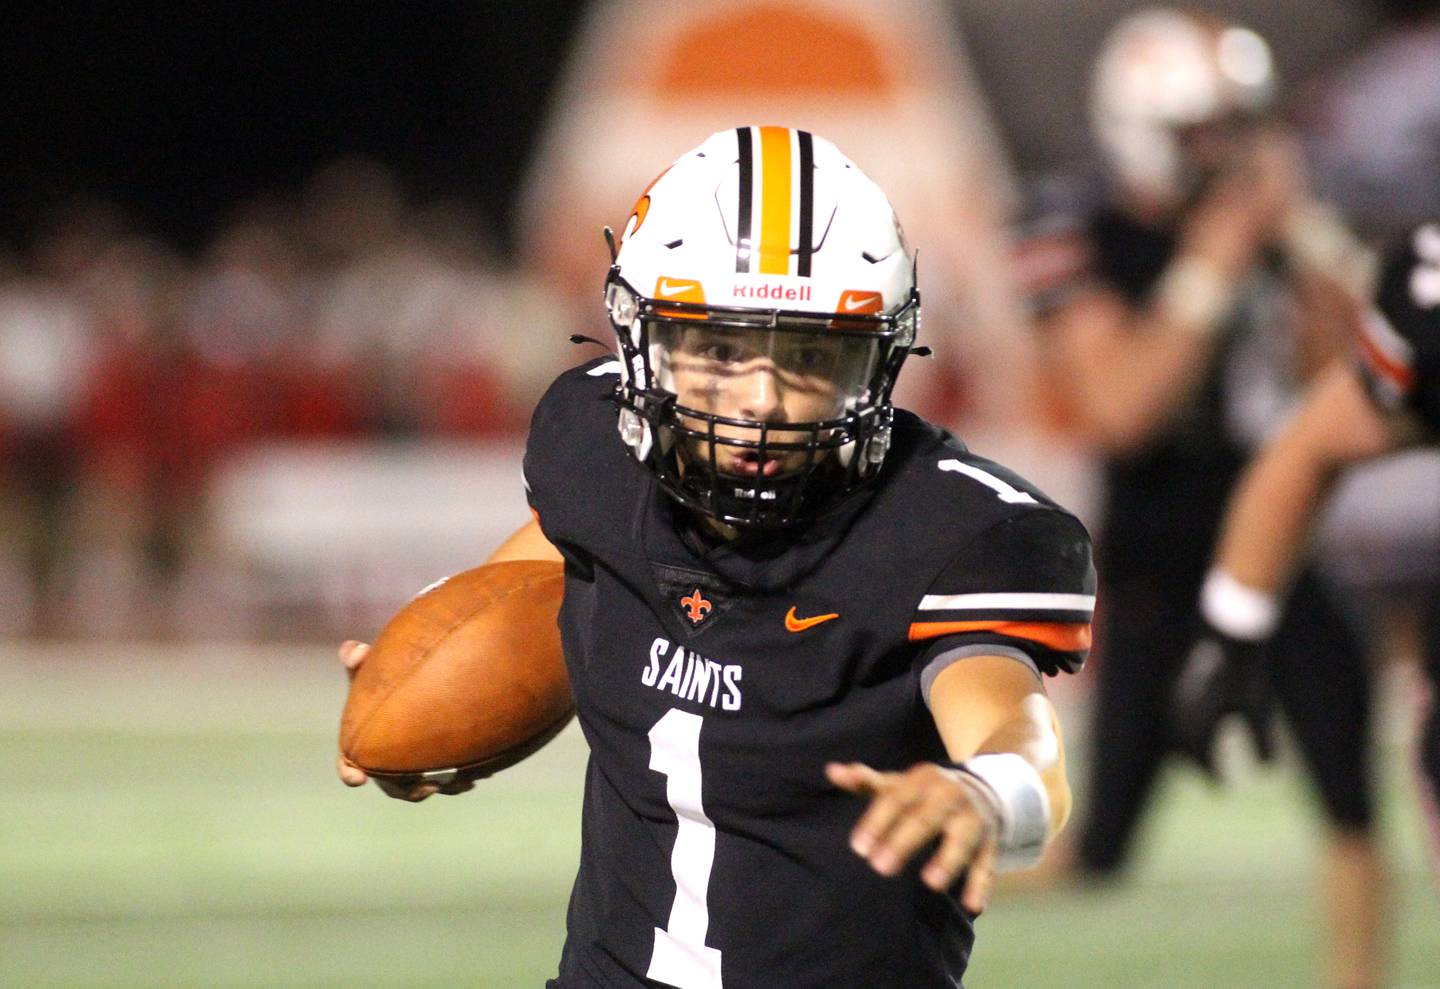 St. Charles East quarterback Lane Robinson keeps the ball during the season opener against Lincoln-Way Central in St. Charles on Friday, Aug. 26, 2022.